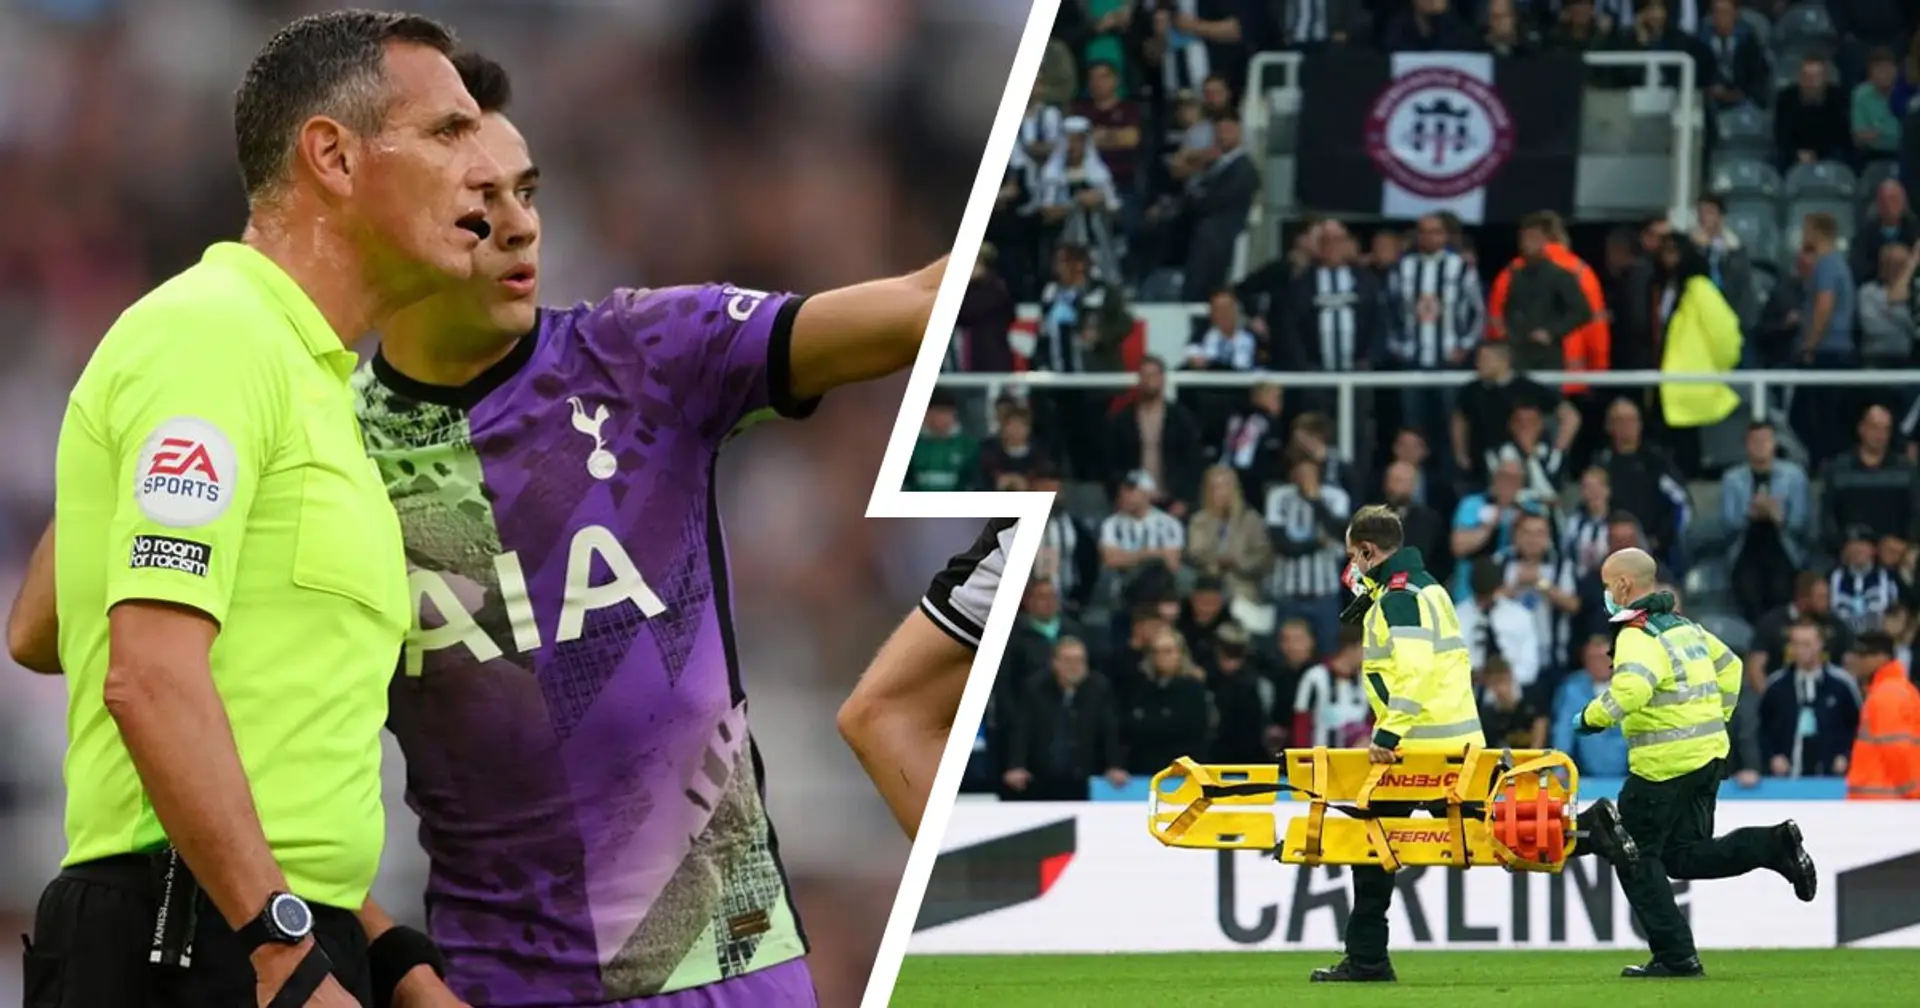 Newcastle United fan who collapsed during Spurs game ‘responsive in hospital’